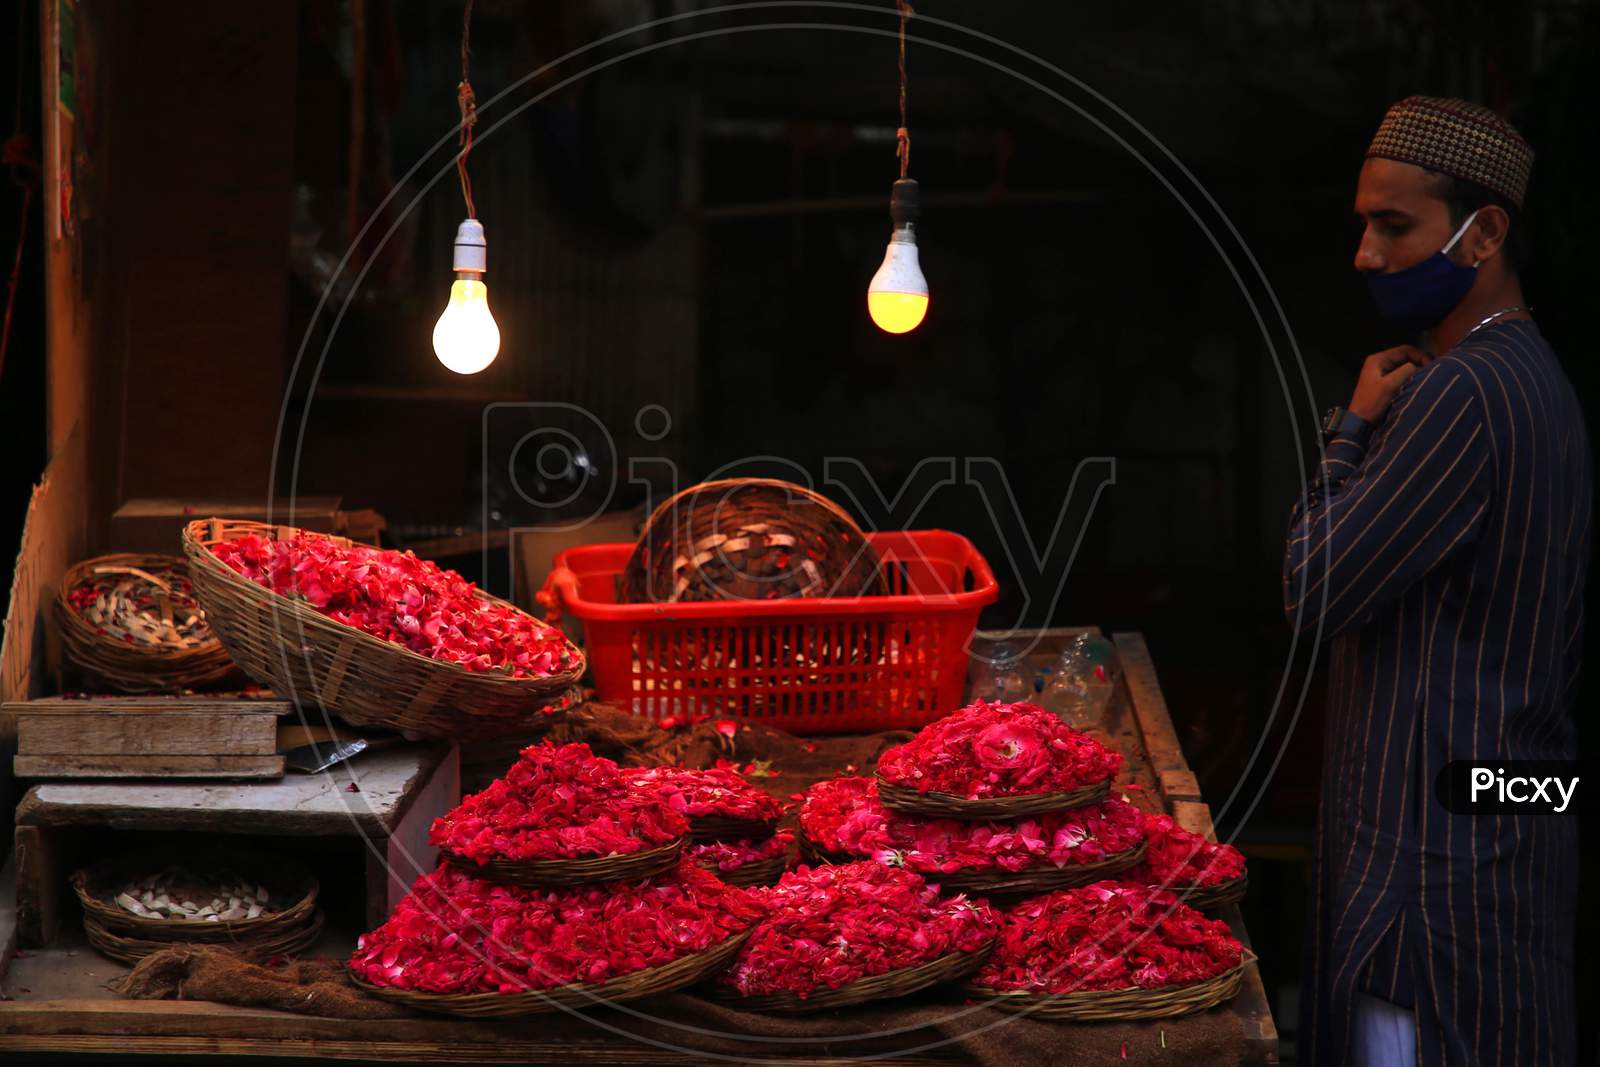 A Muslim devotee stands next to a stall selling flower petals outside the shrine of Sufi saint Khwaja Moinuddin Chishti In Ajmer, On August 1, 2020.